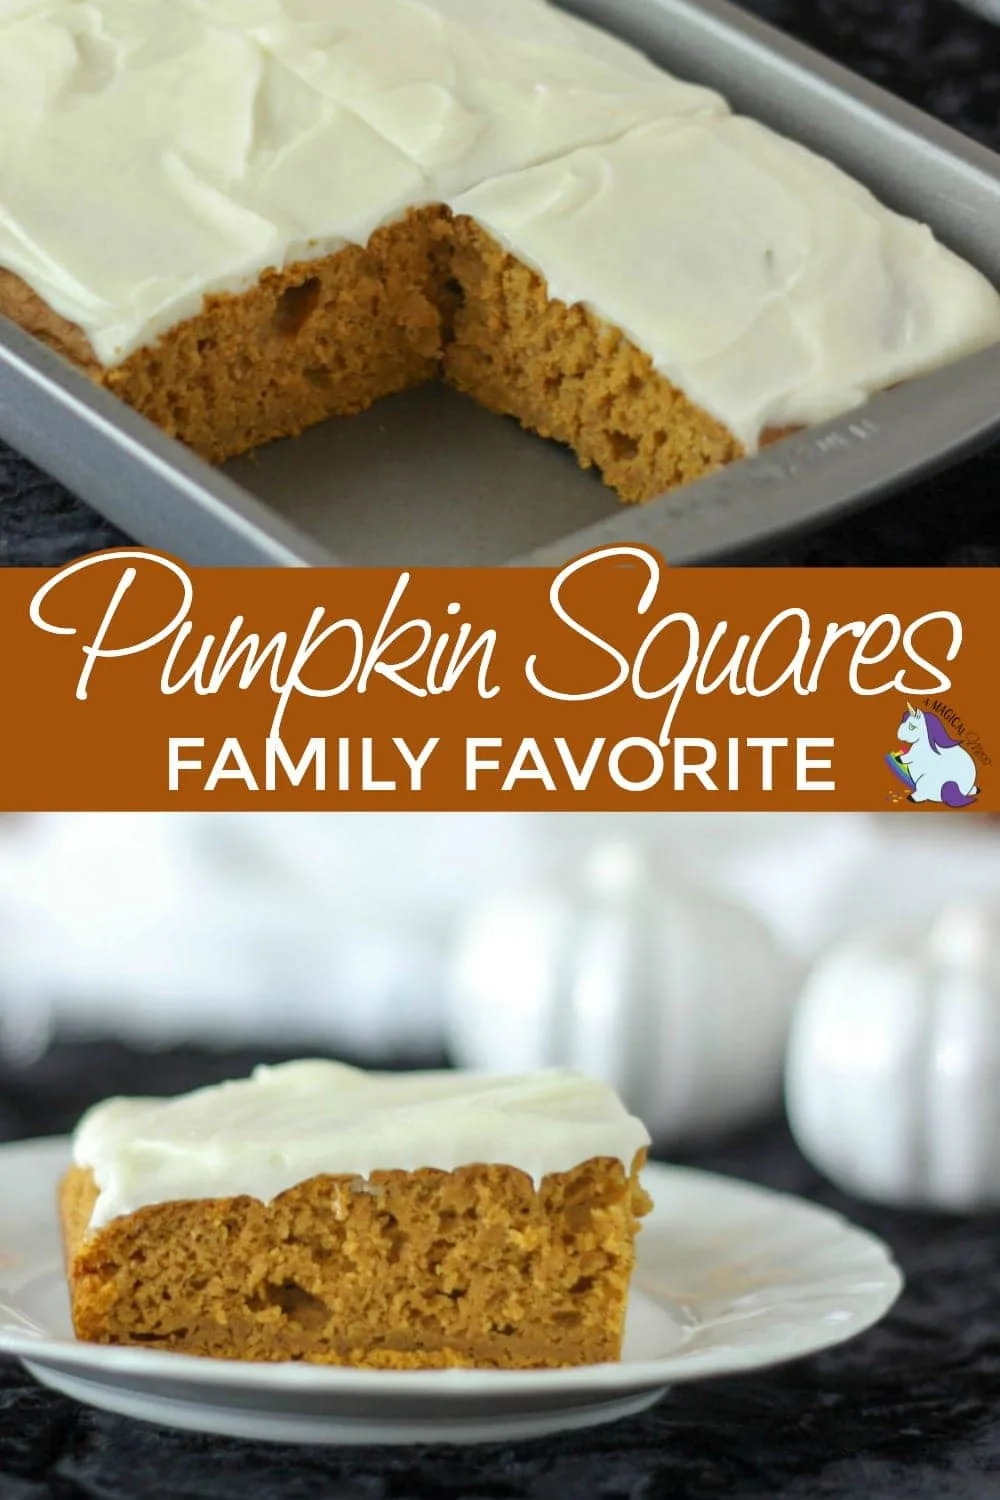 pumpkin cake slices in a pan and one on a plate